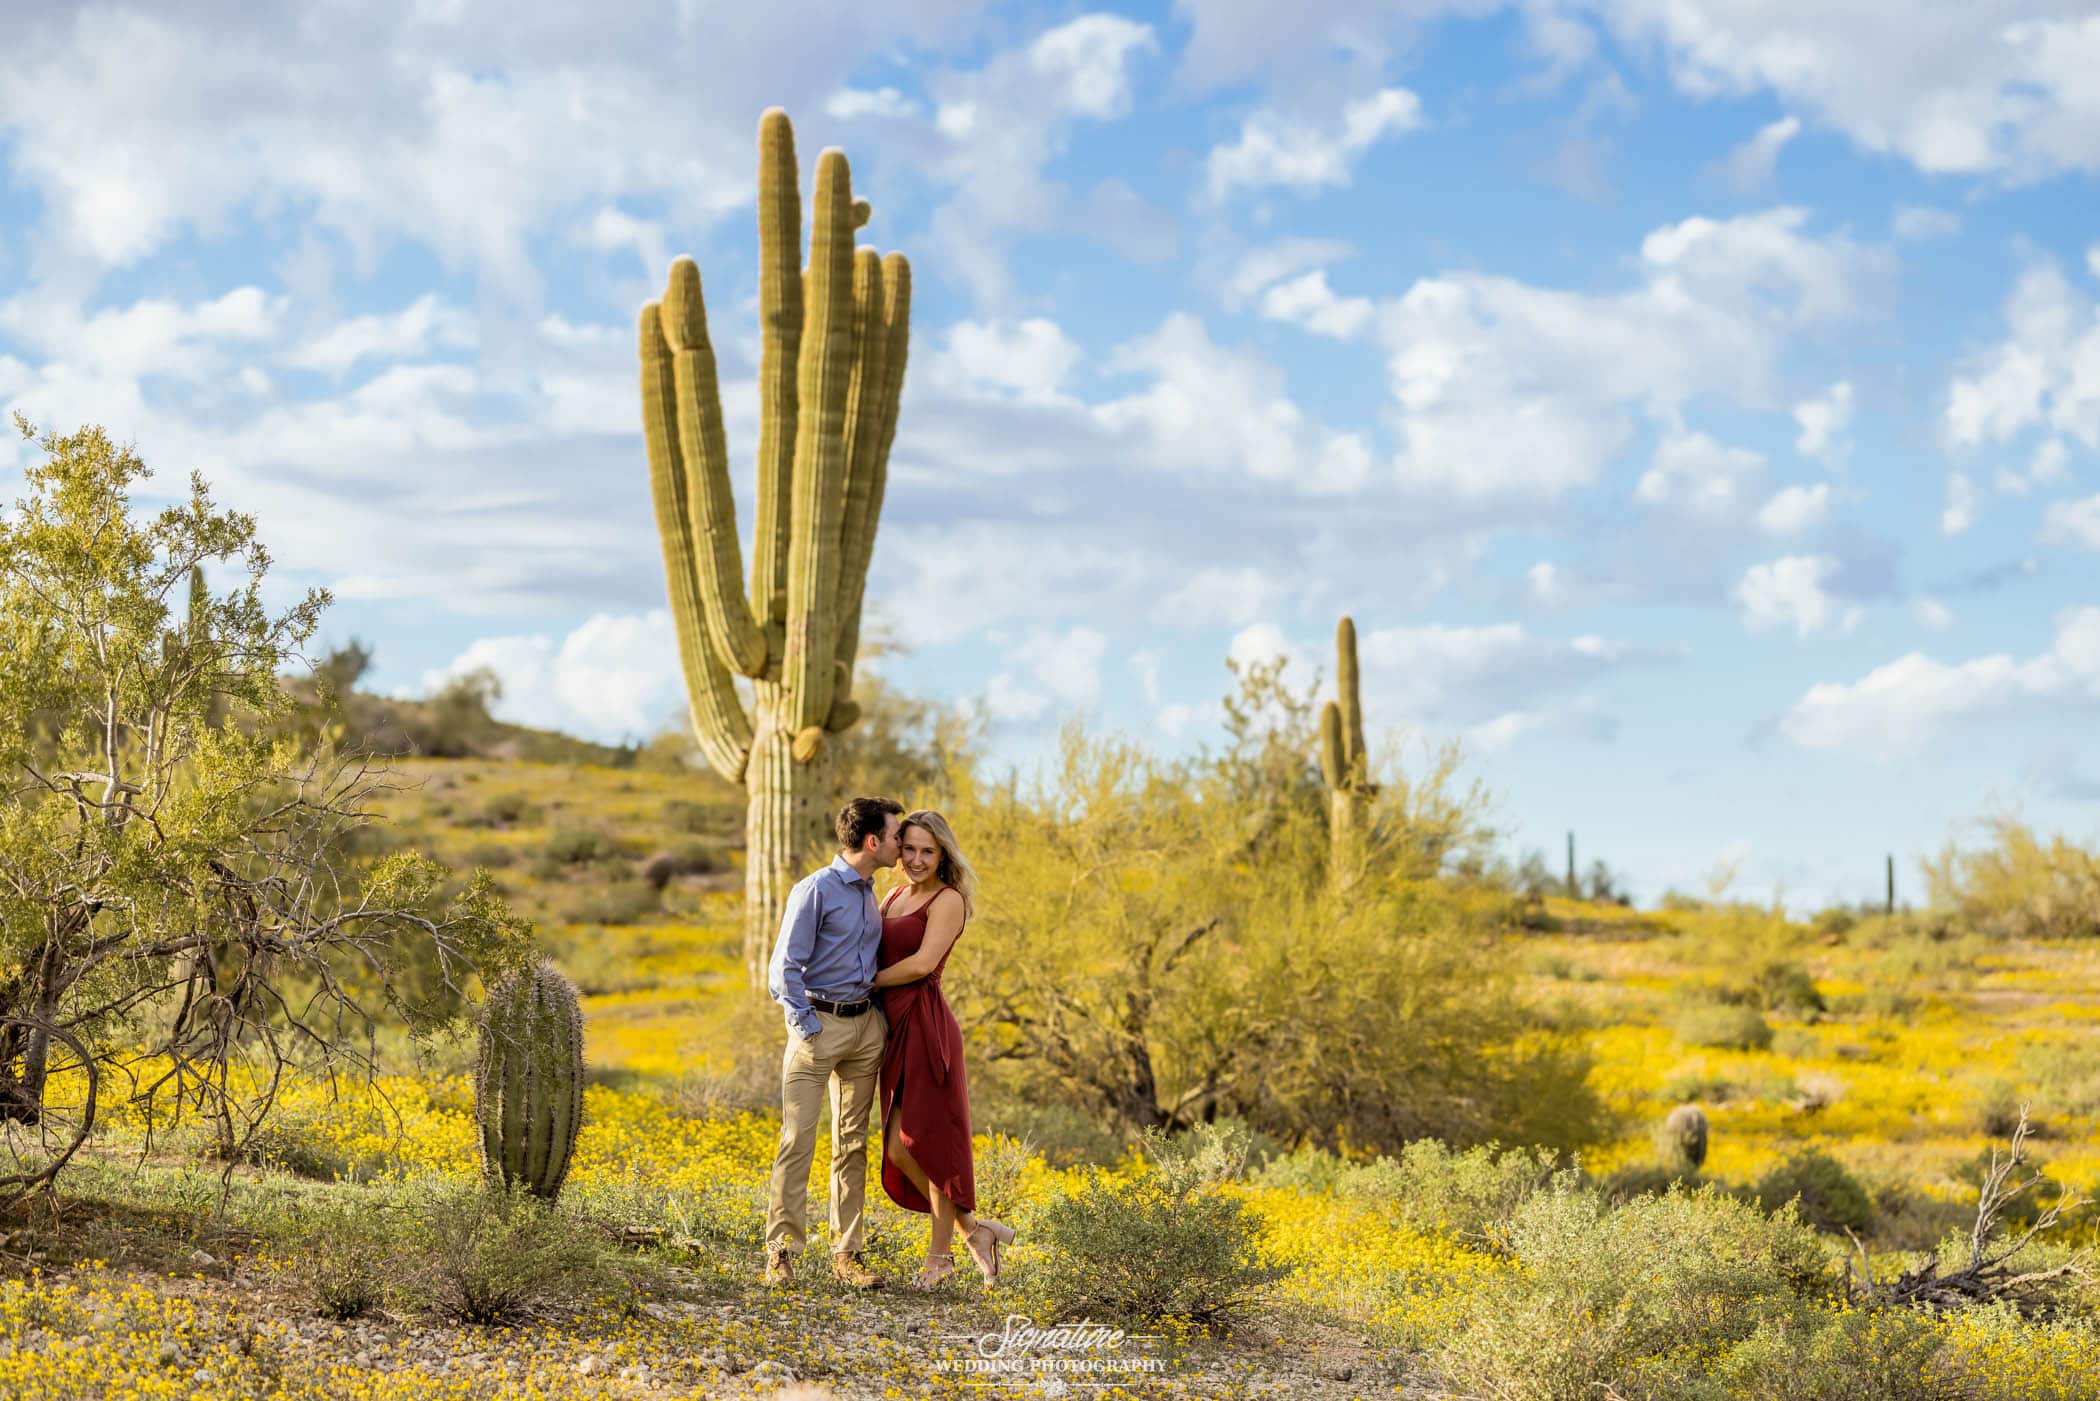 Couple kissing in front of cactus